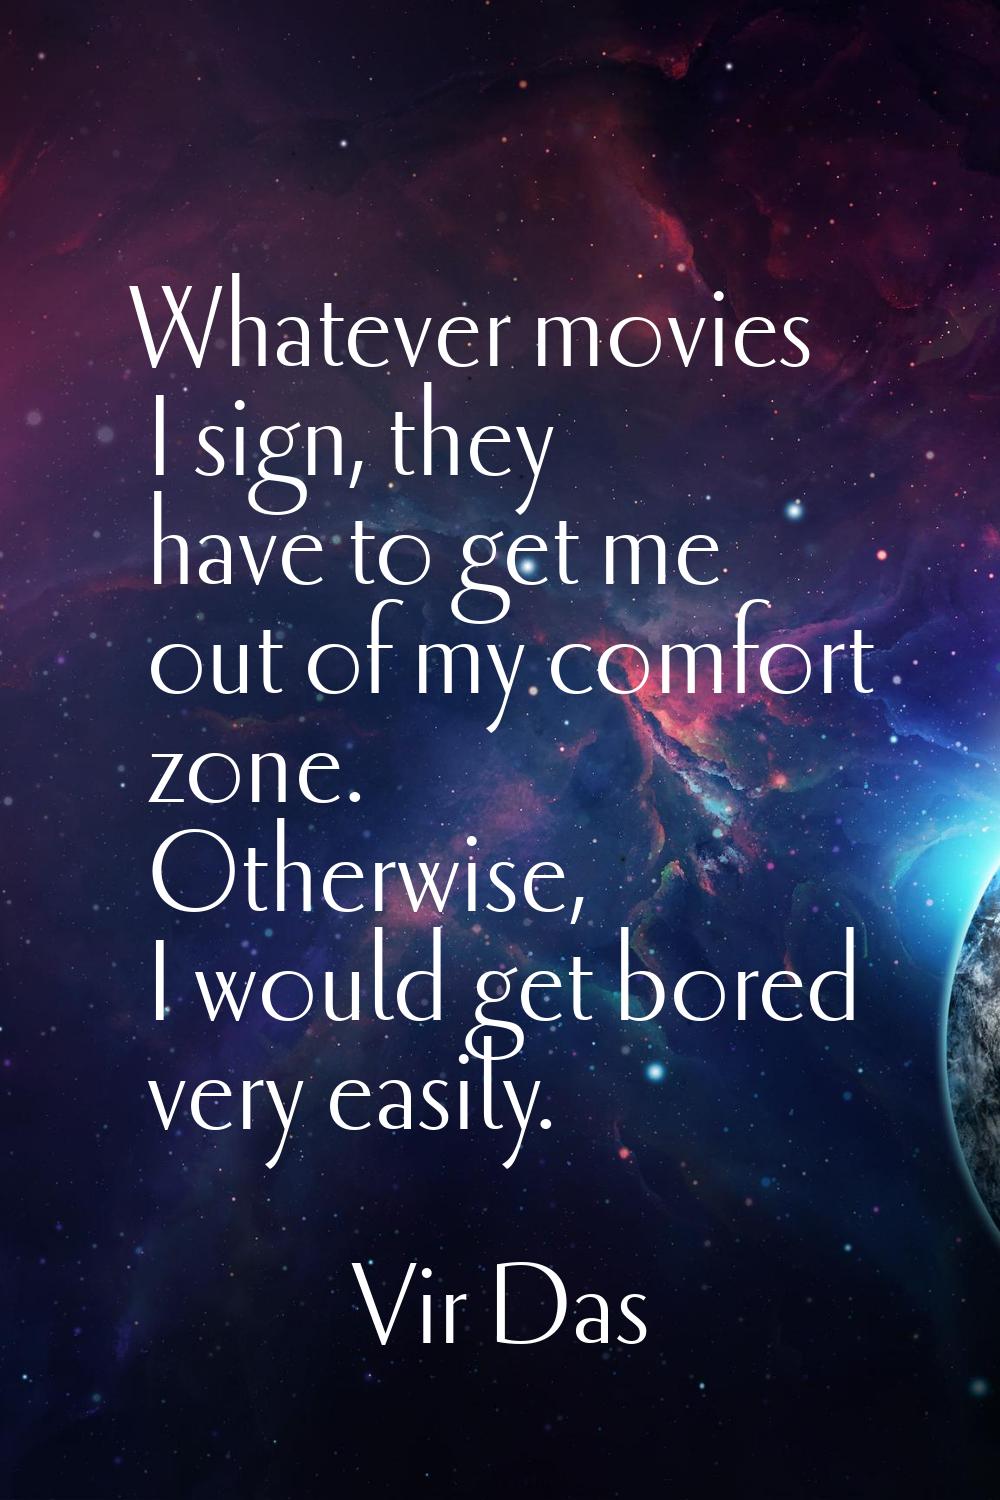 Whatever movies I sign, they have to get me out of my comfort zone. Otherwise, I would get bored ve